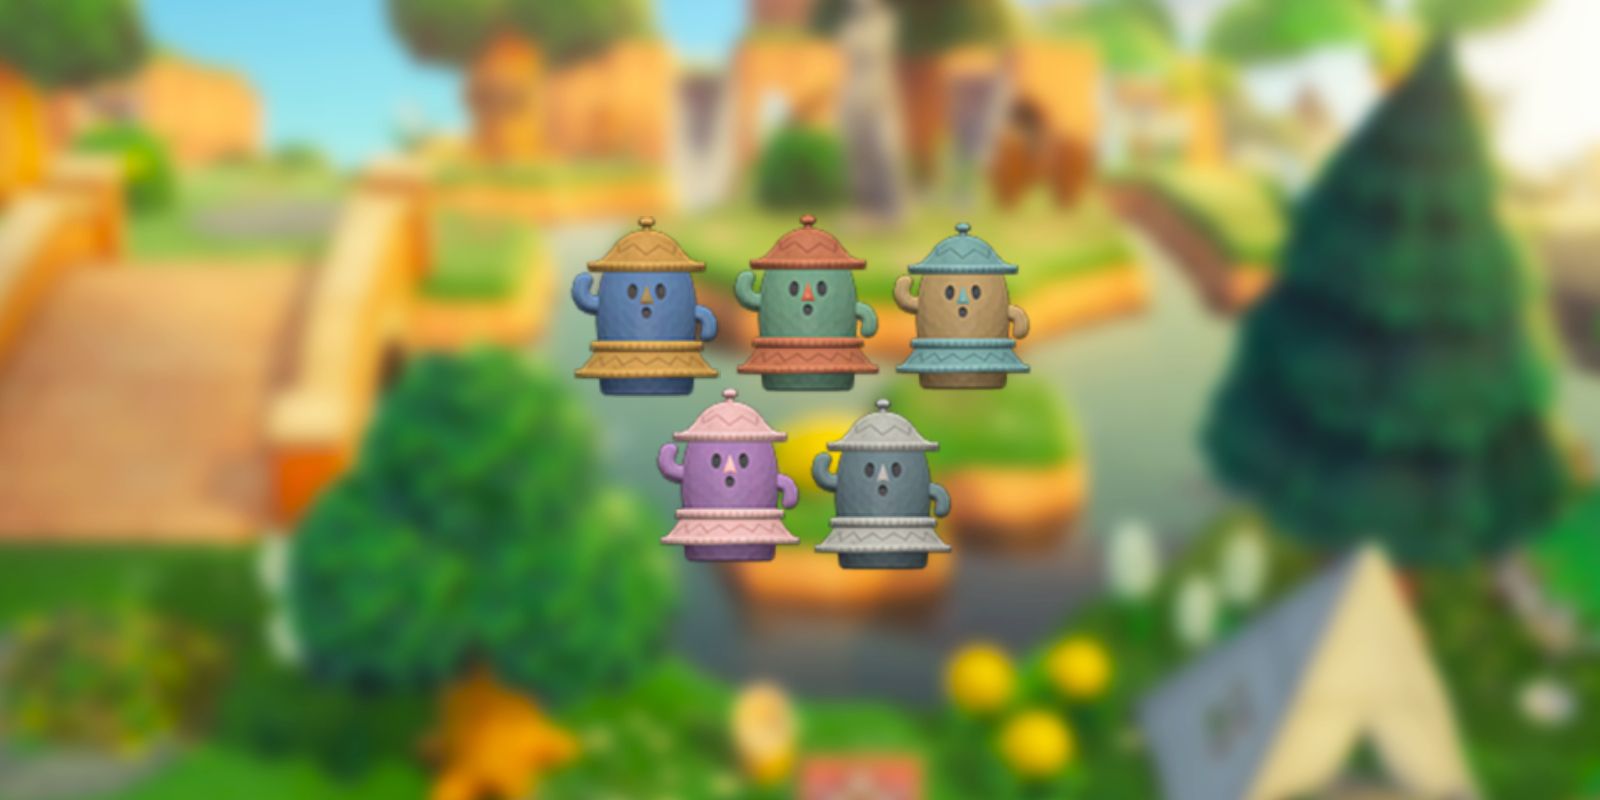 All New Gyroids In Animal Crossing 2.0 Drummoids